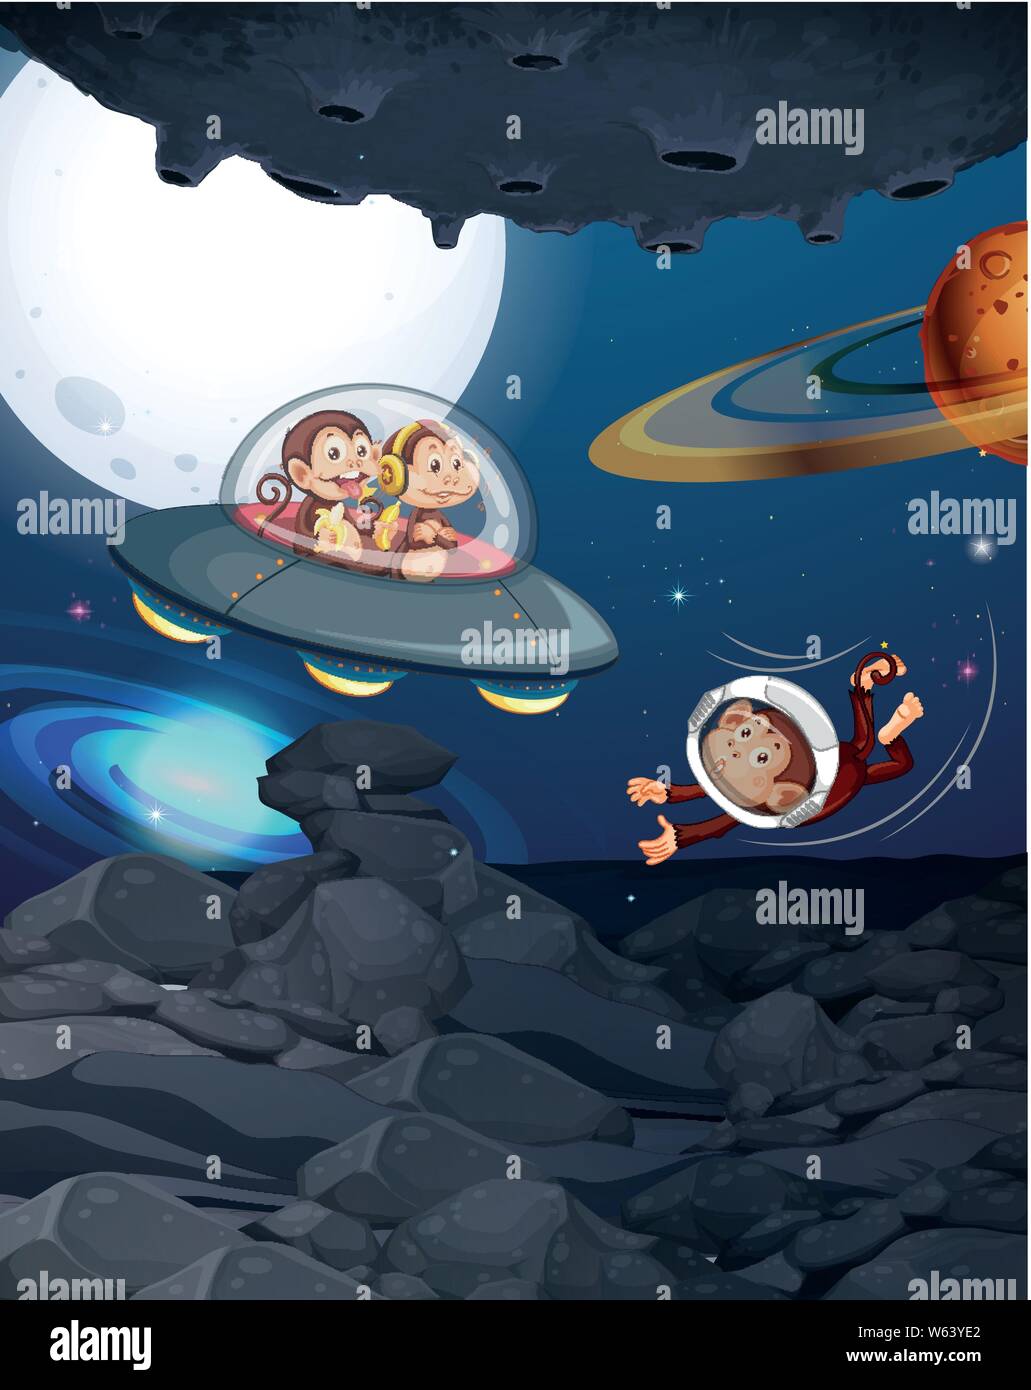 Monkeys playing in space setting illustration Stock Vector